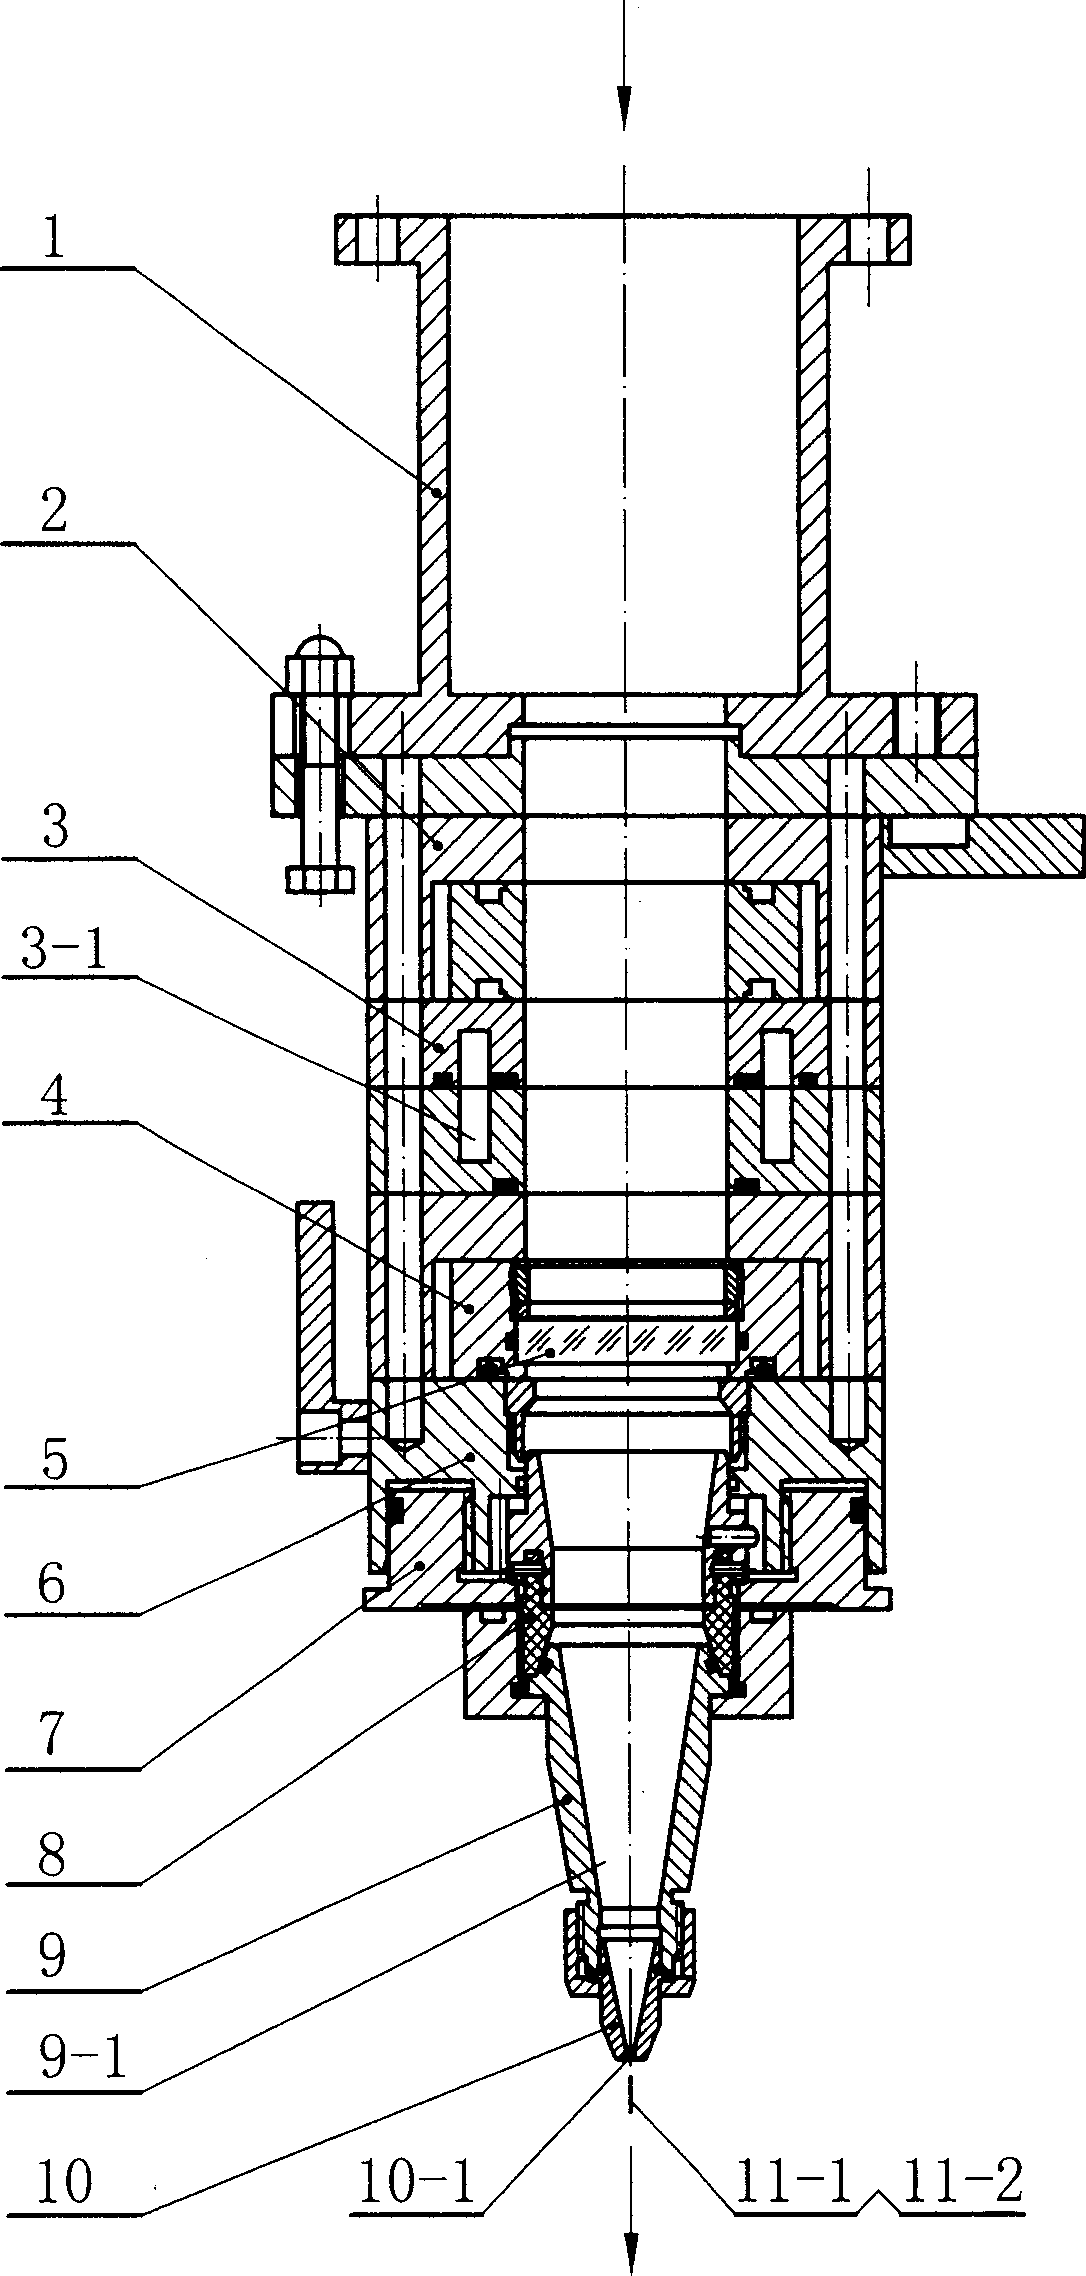 Digital-control laser cutting head and method for making same